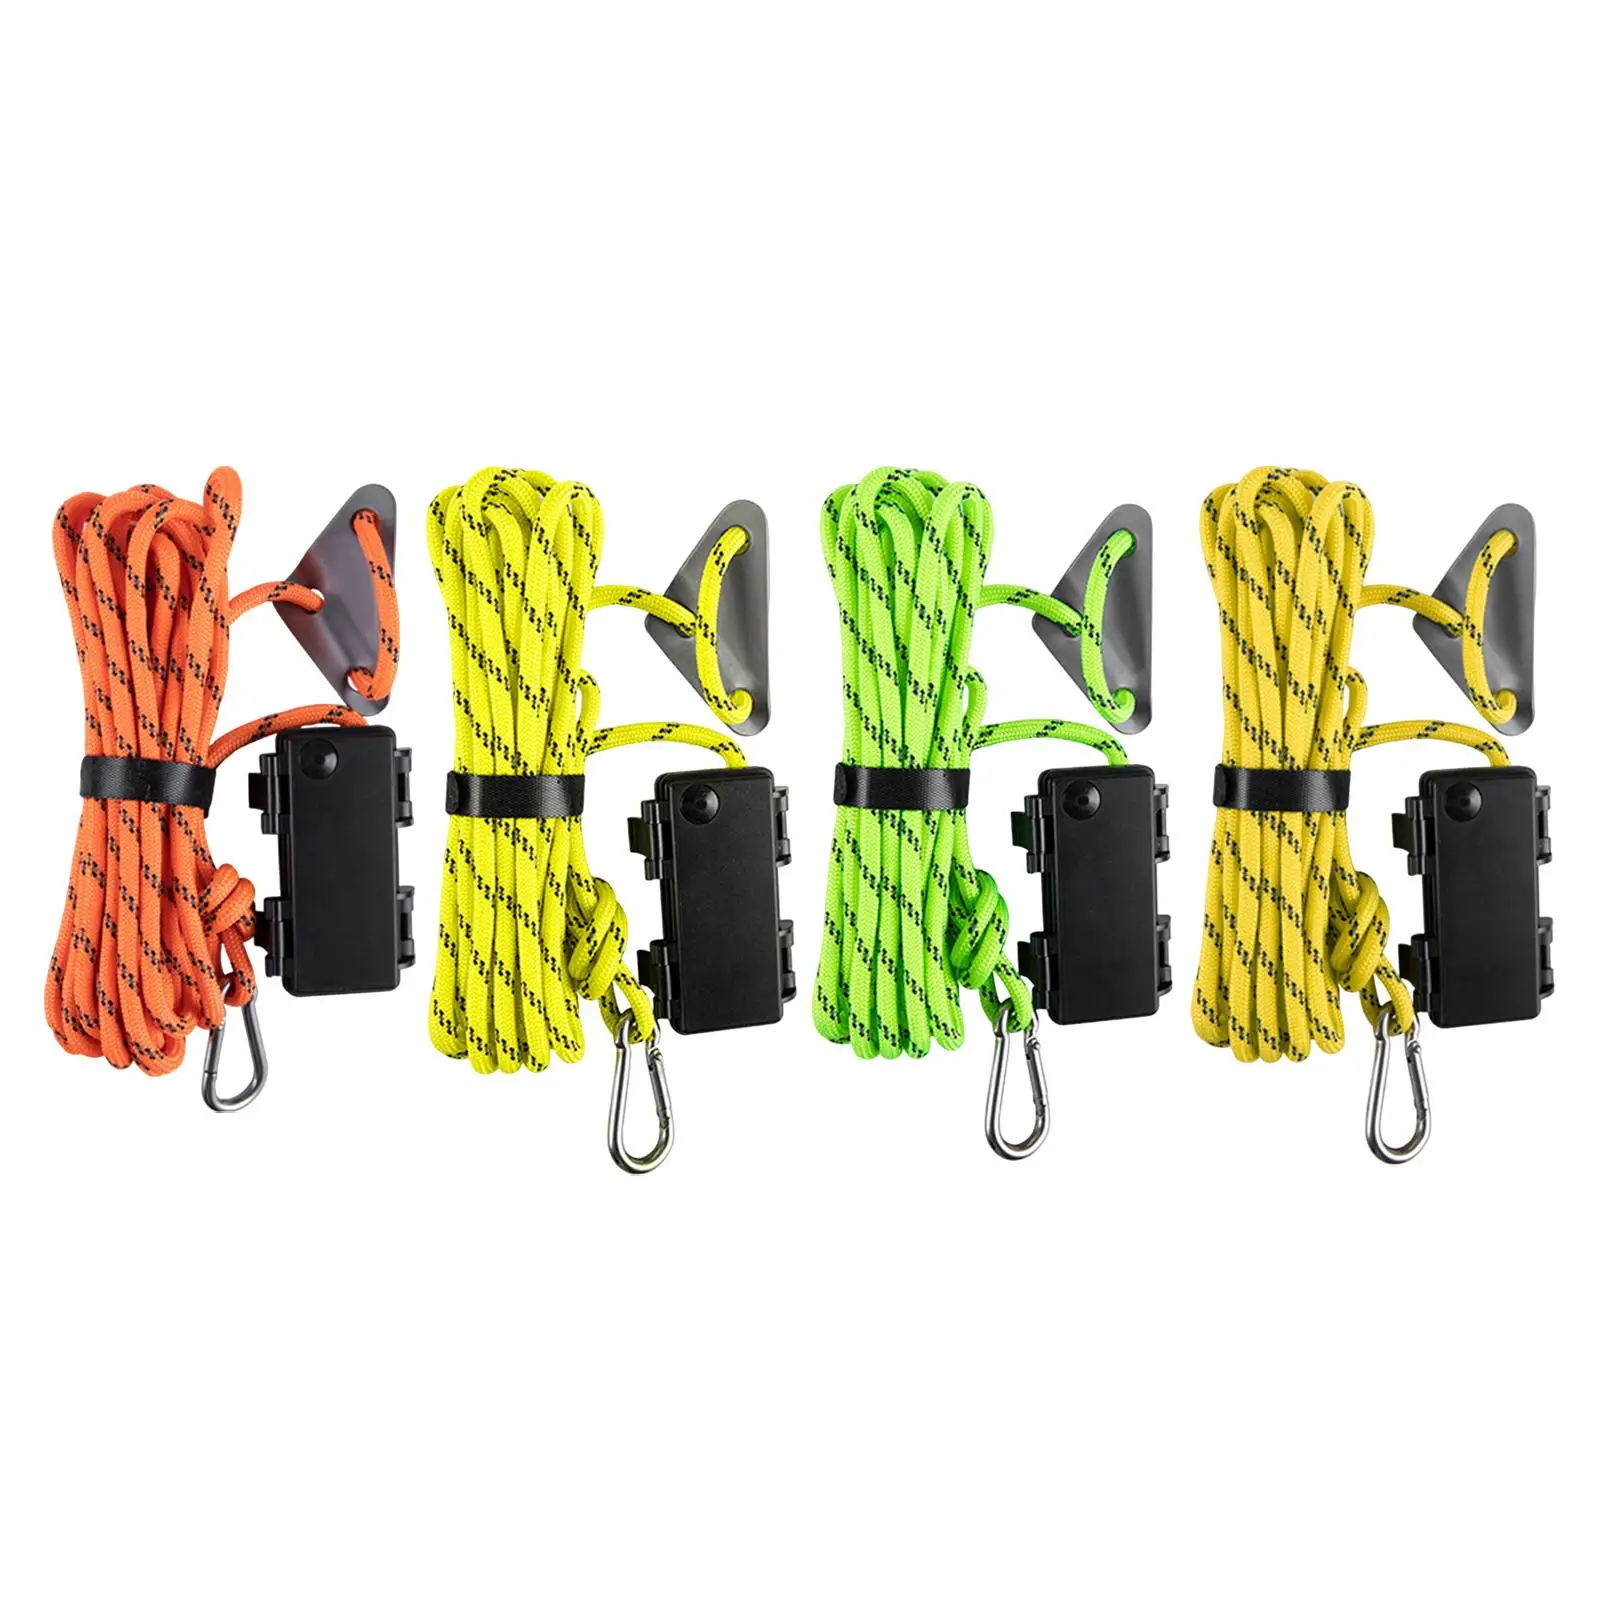 LED Tent Rope Guy Lines Lamp Lights Waterproof Tent Accessories Paracord Camping